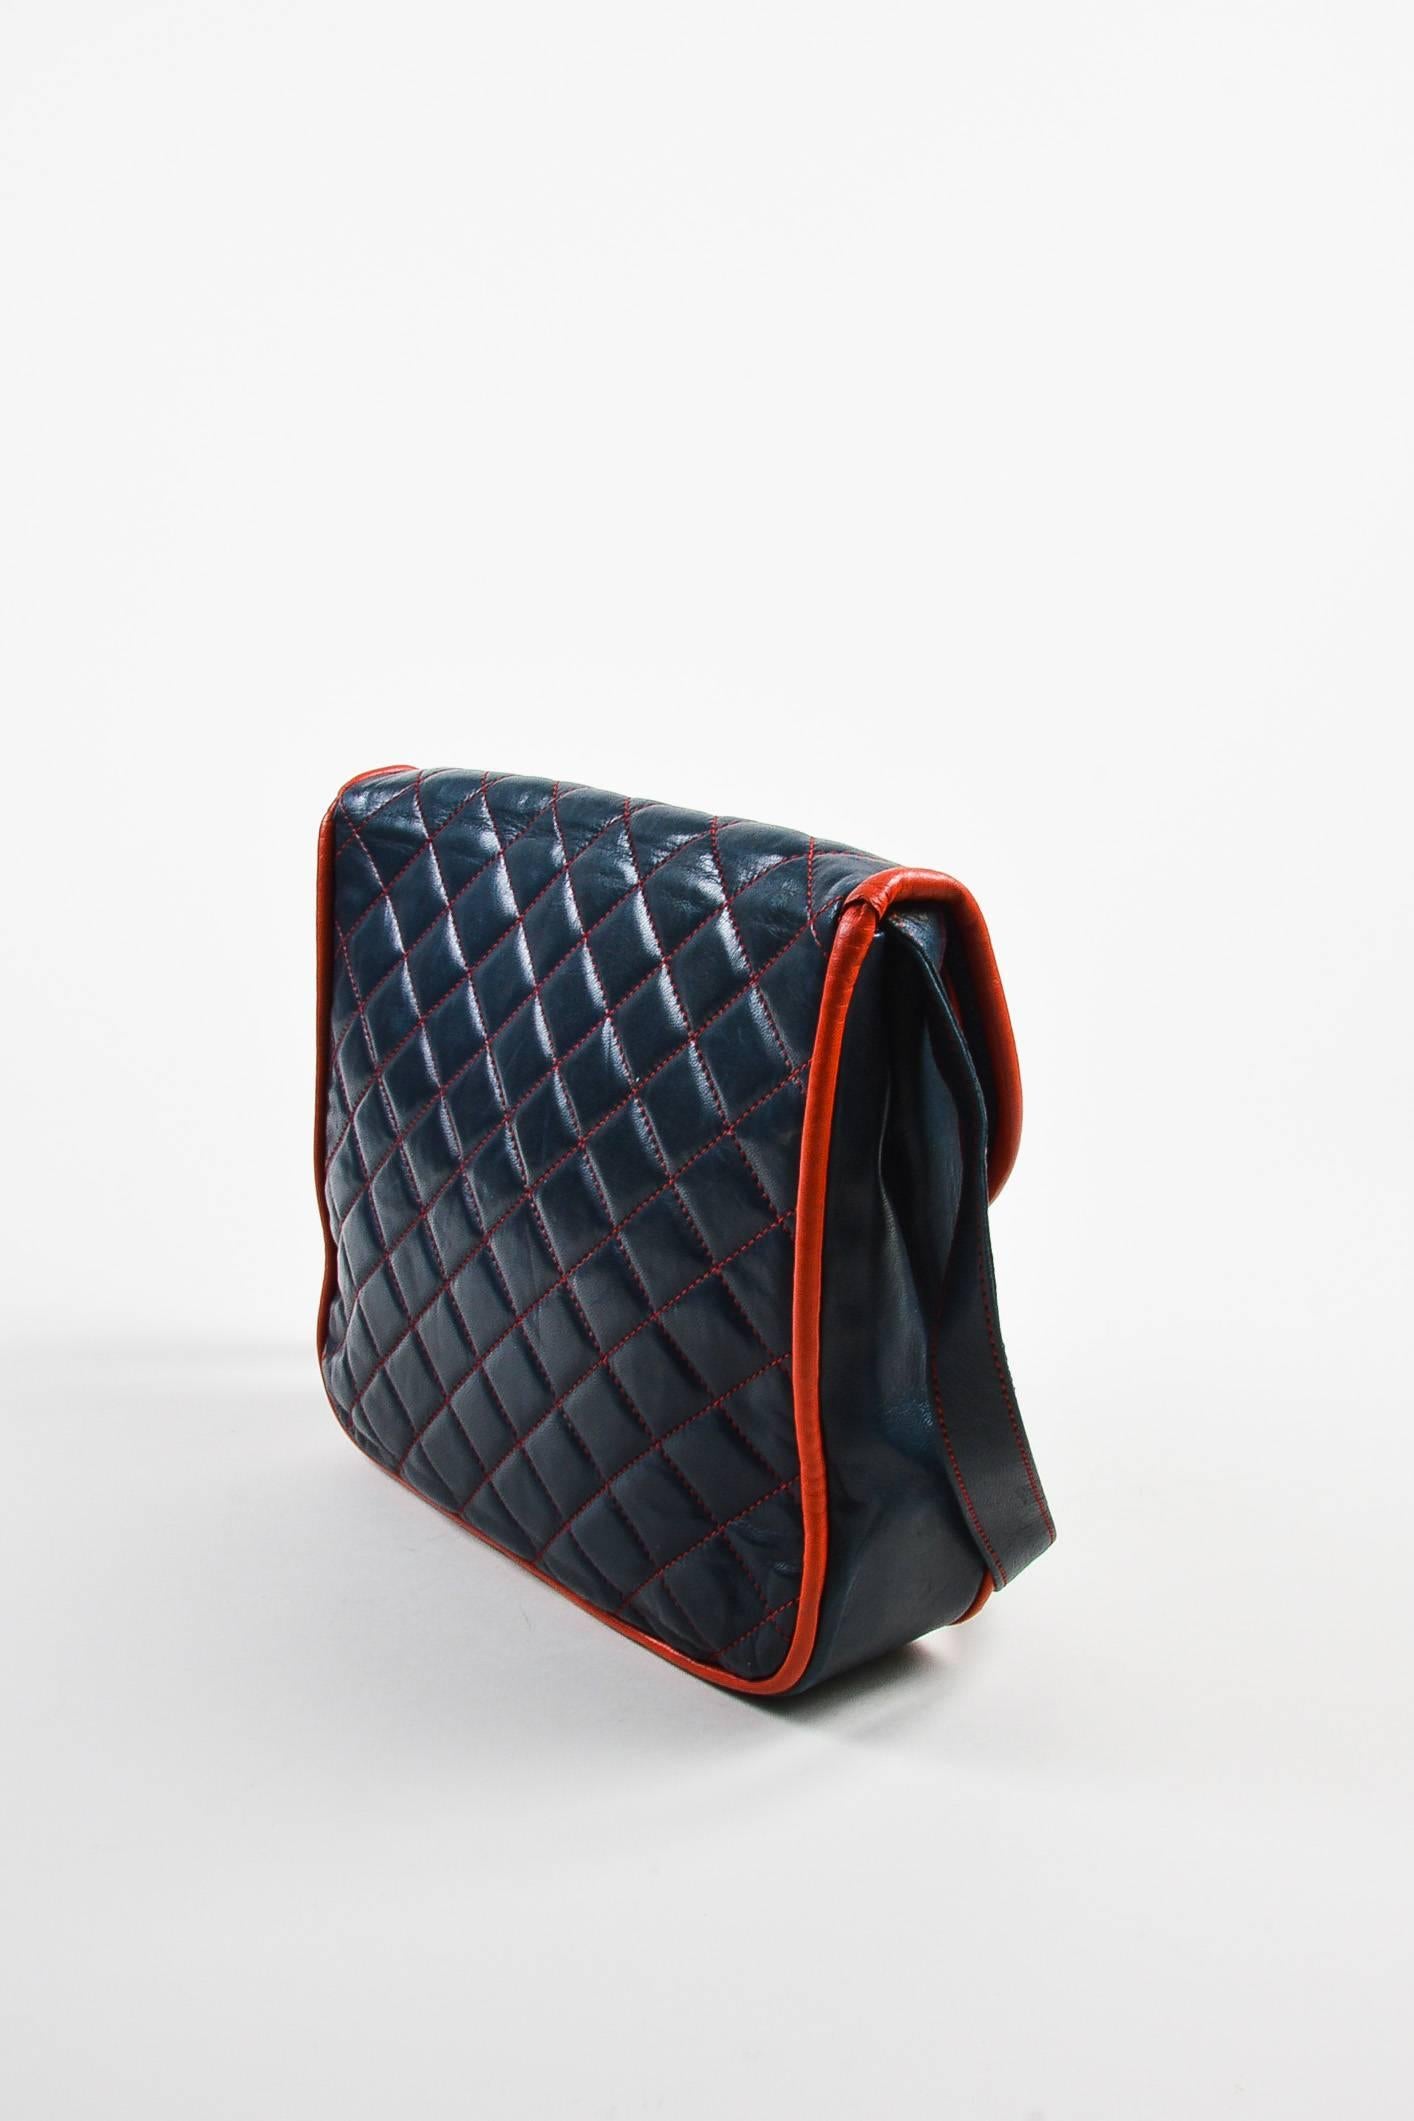 Versatile bag constructed of navy blue leather. Red accents at piping and quilted topstitching. Flap top with snap closure. Flat leather shoulder strap. Spacious interior lined with ribbed textile. Circa 1980s.

Interior Features: Zip